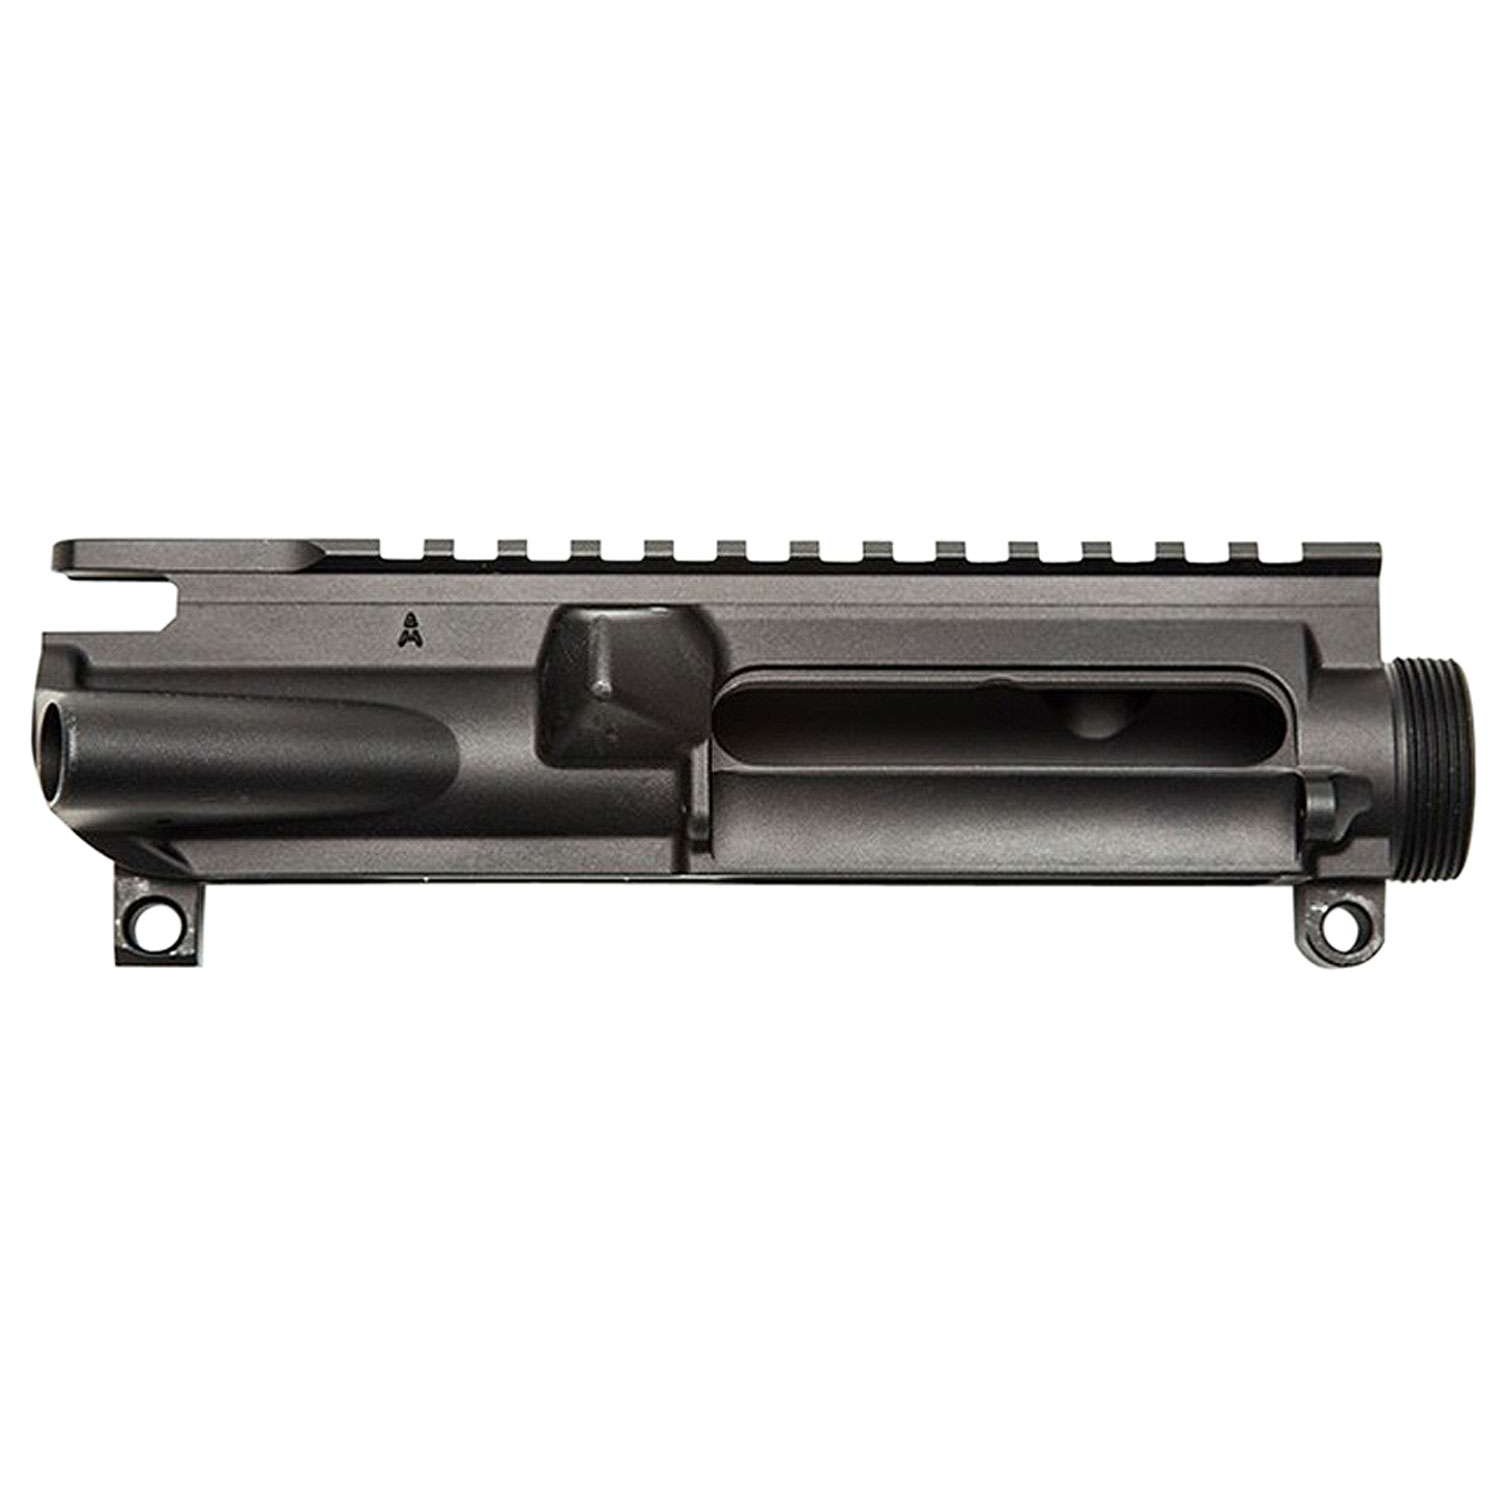 AR 15 STRIPPED UPPER RECEIVERS